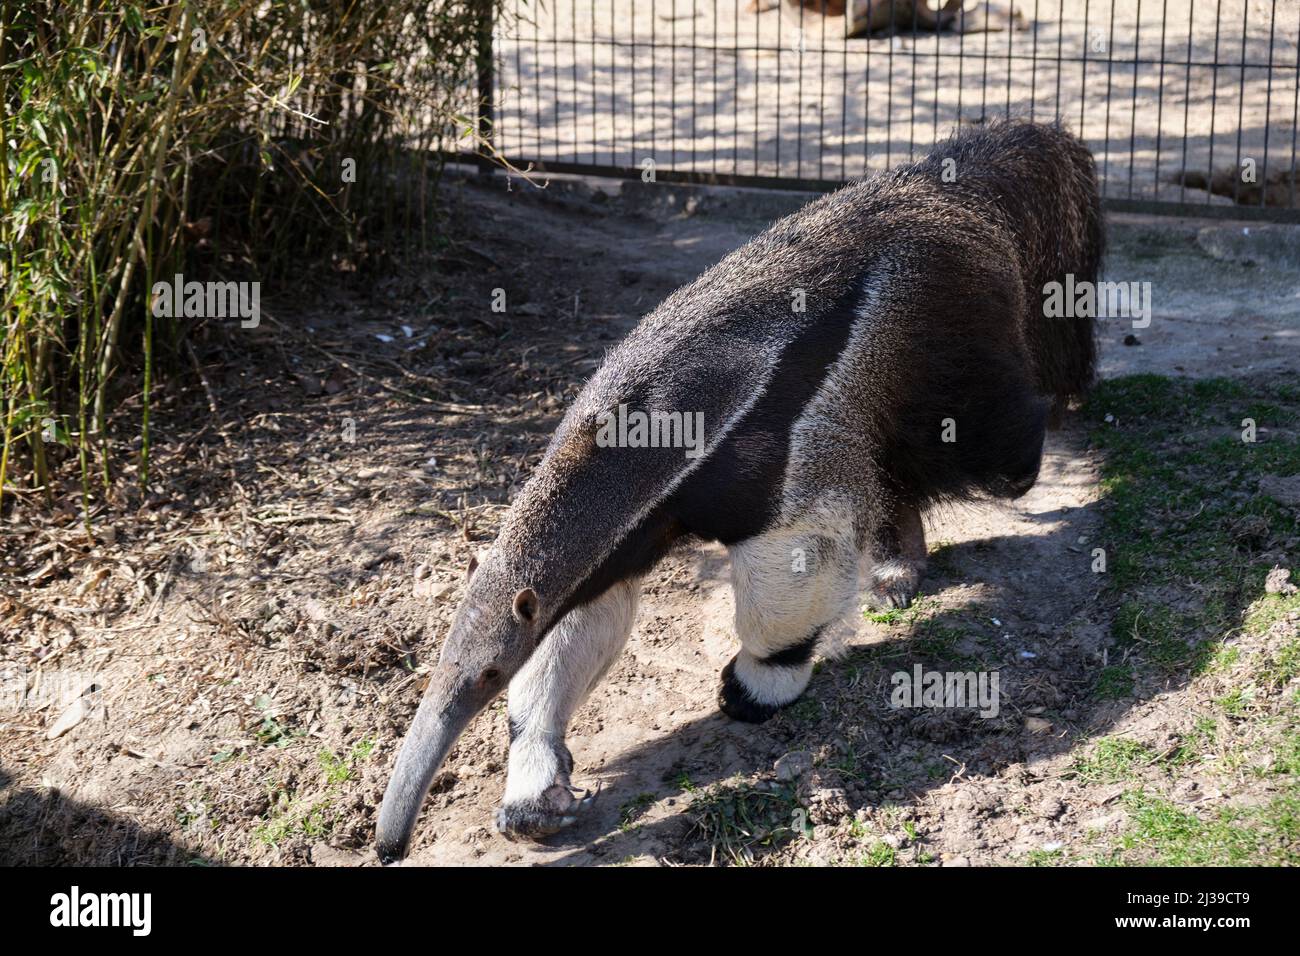 The giant anteater (Myrmecophaga tridactyla), aka ant bear, an insectivorous mammal native to Central and South America, at the Madrid Zoo Aquarium. Stock Photo